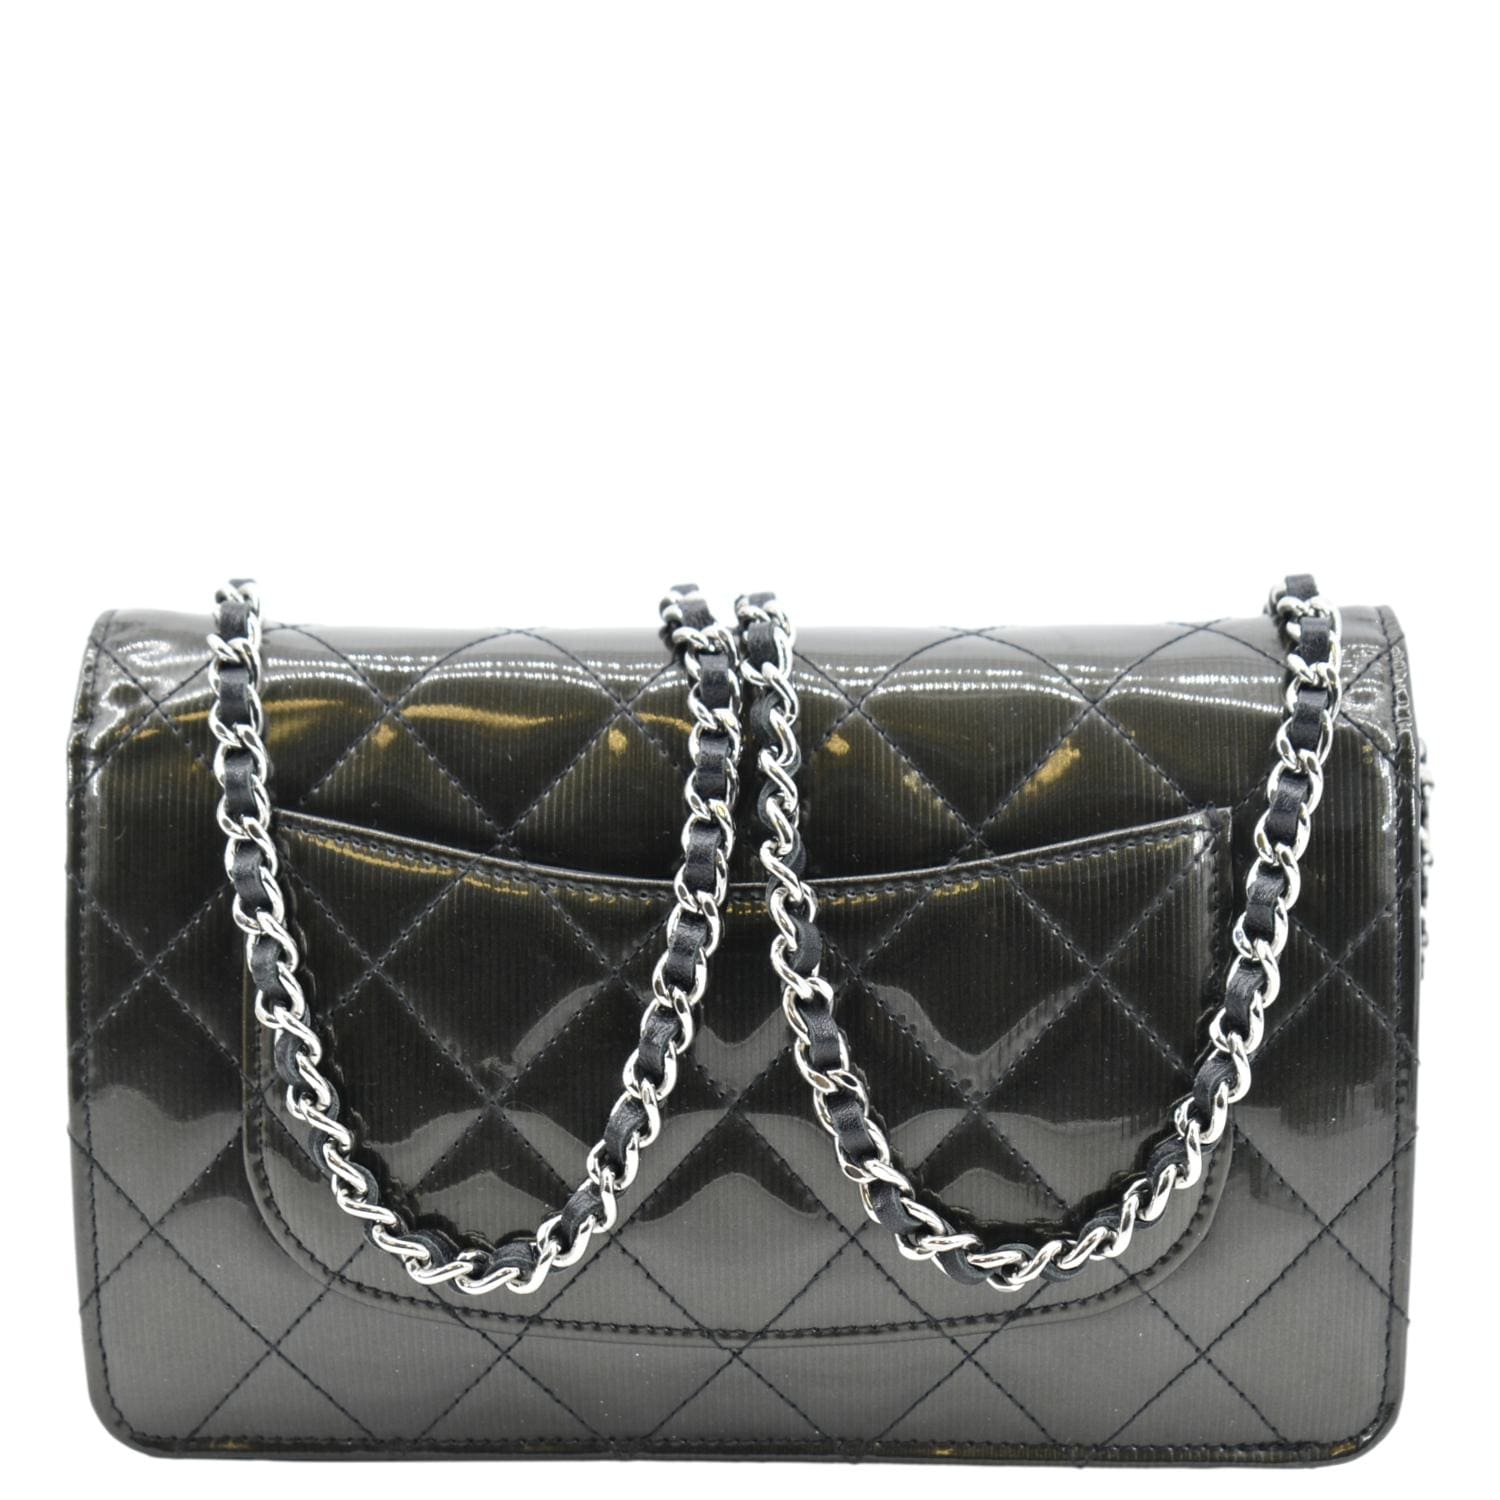 Wallet on chain 2.55 leather crossbody bag Chanel Green in Leather